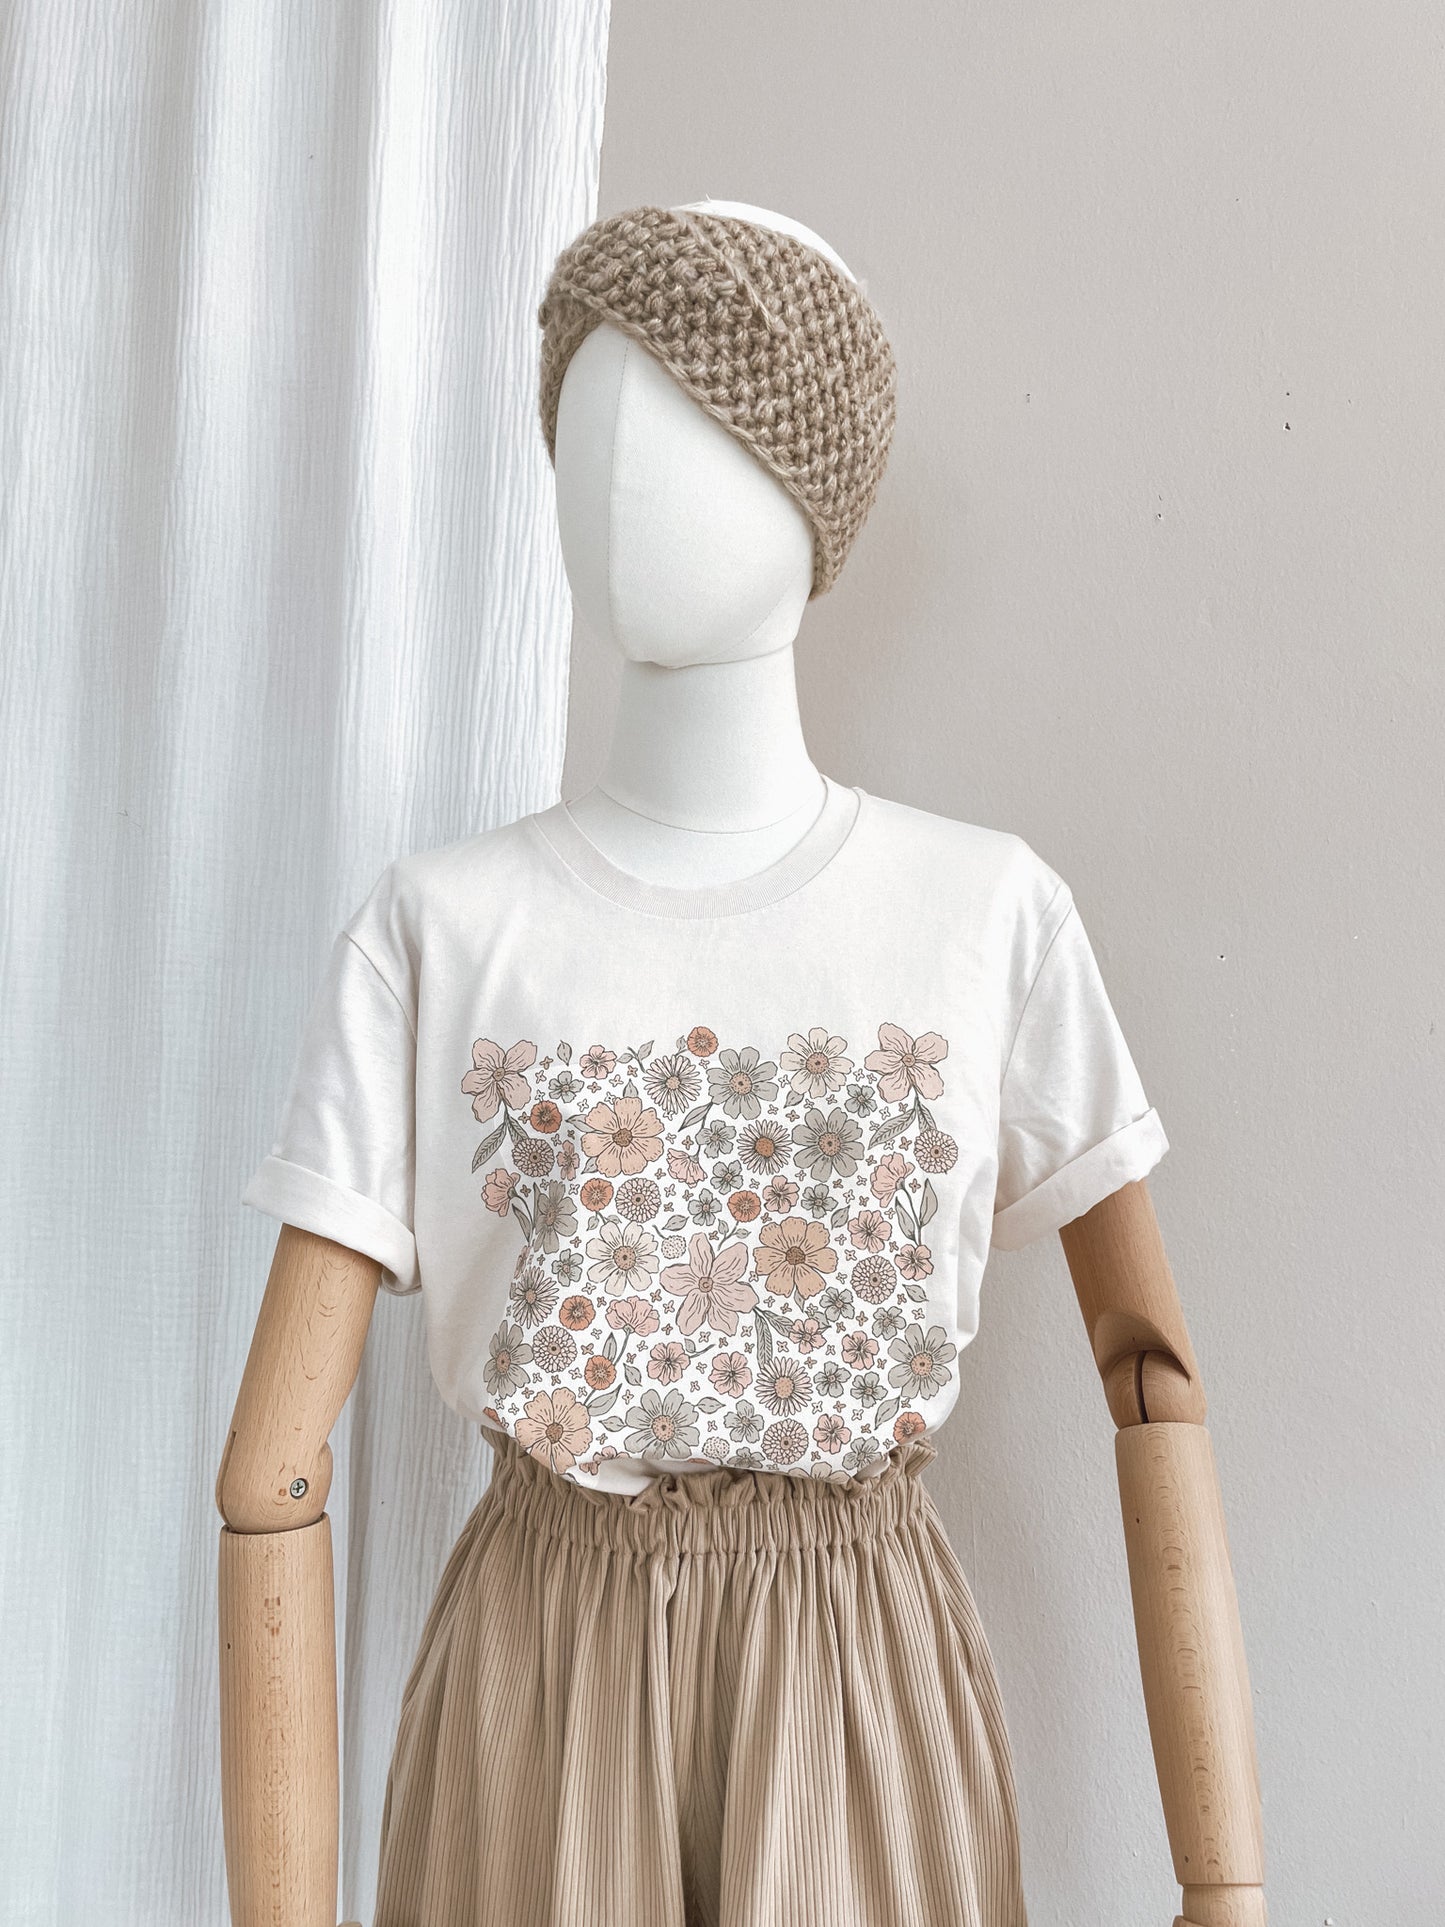 Load image into Gallery viewer, T-shirt / Bold floral ecru / vintage white
